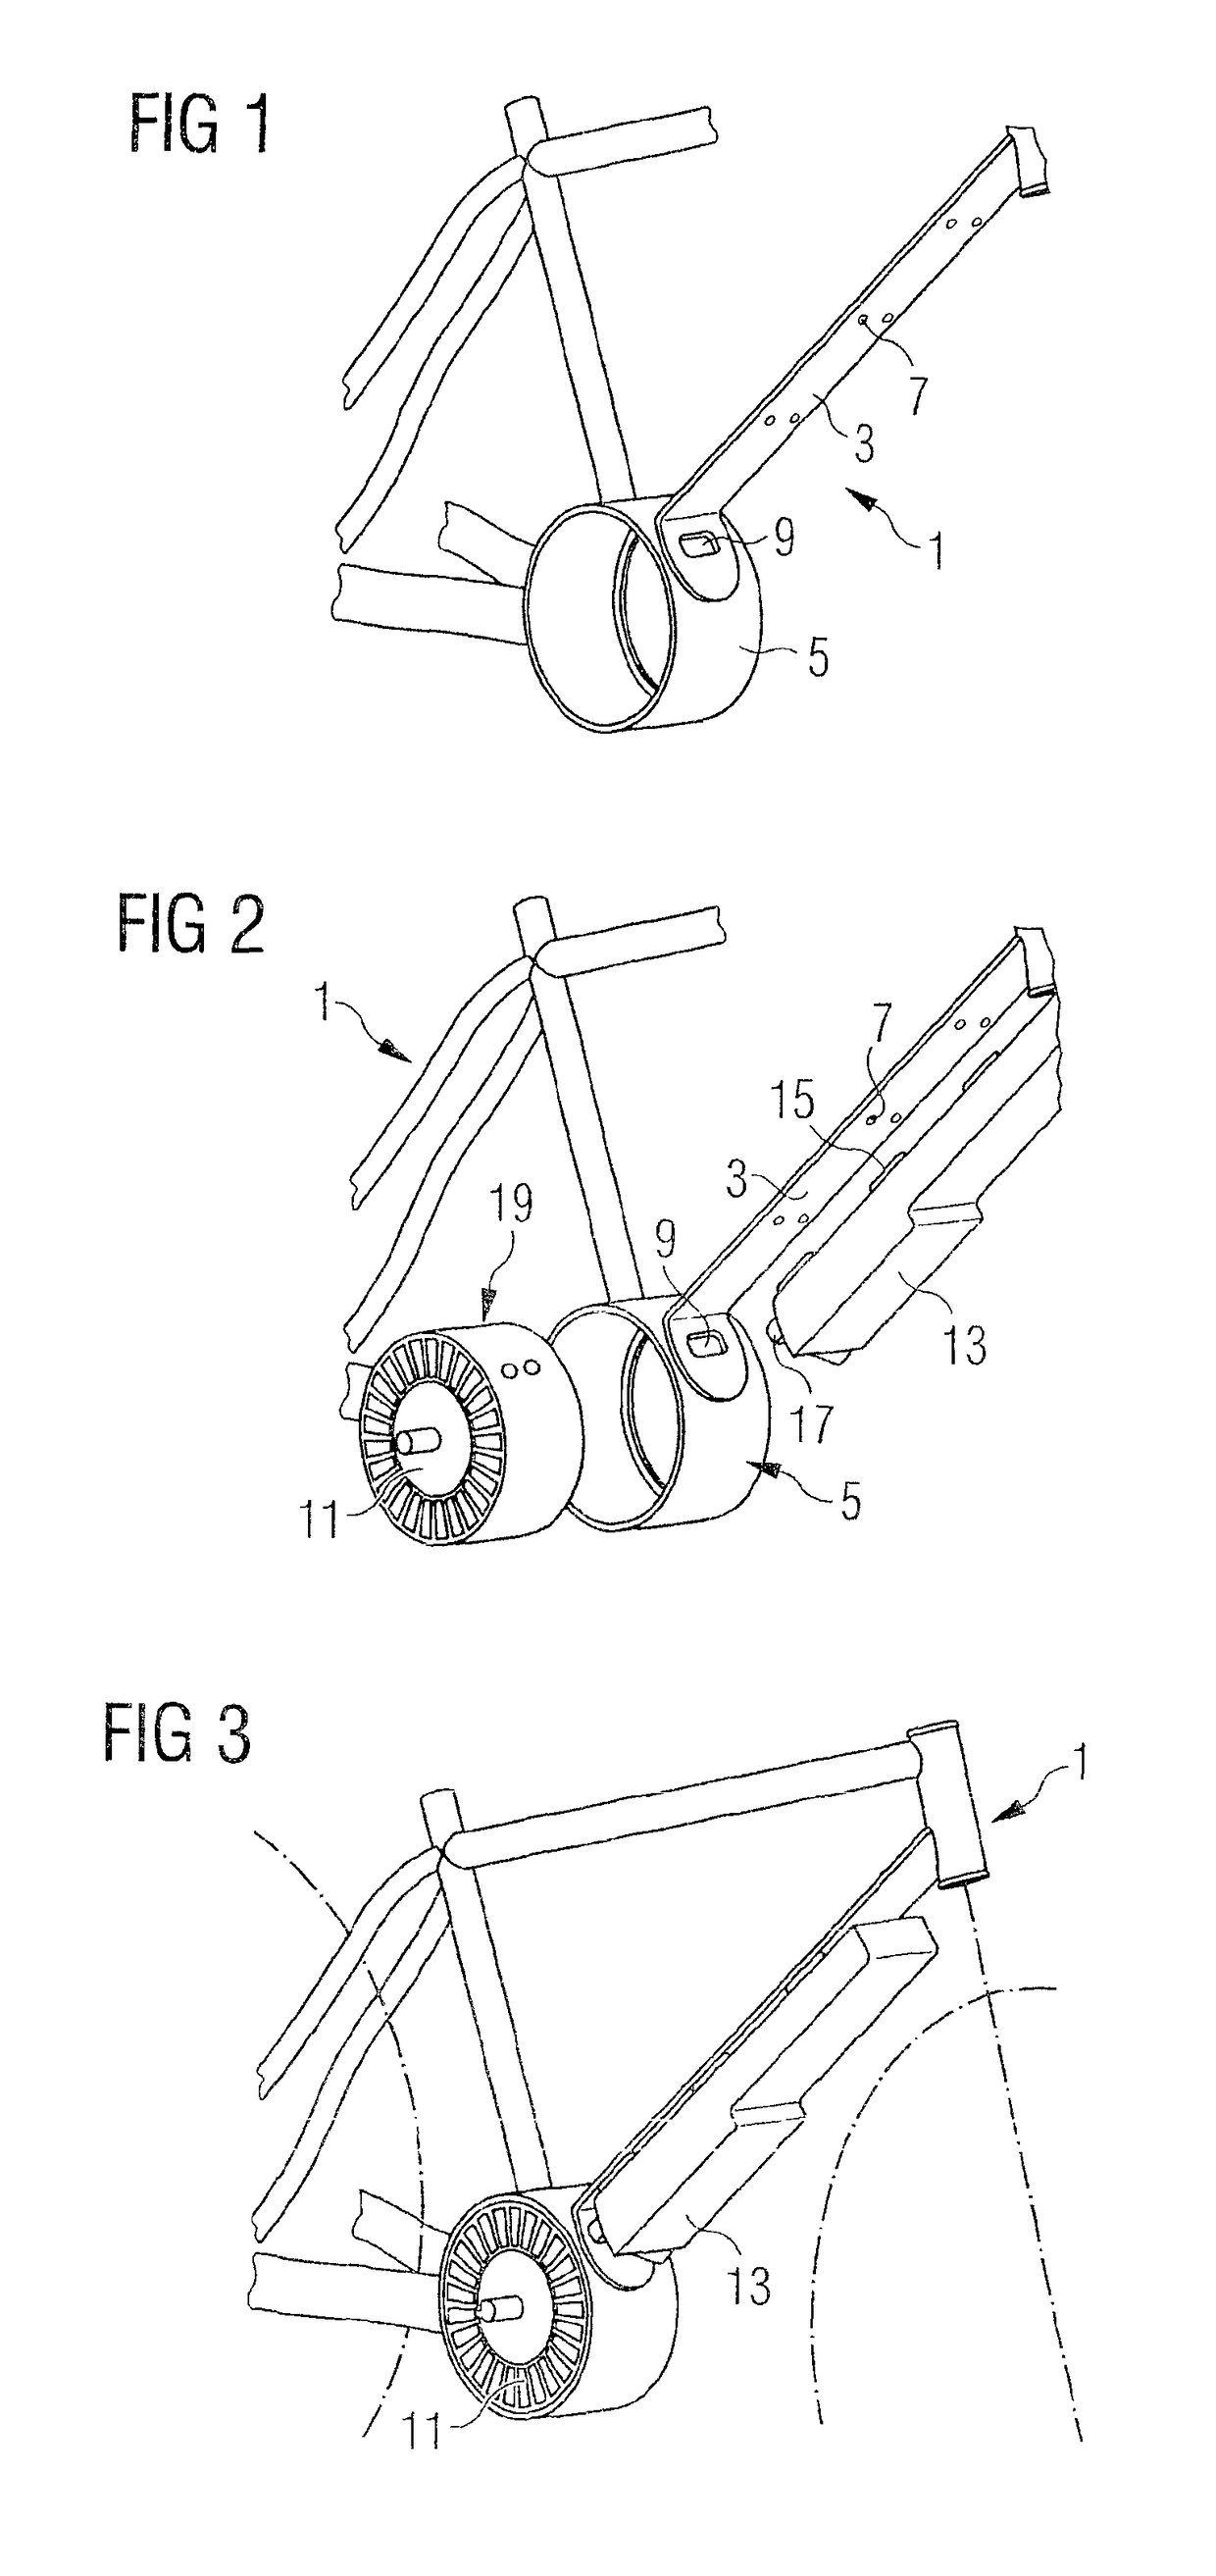 Bicycle frame, battery pack, and bicycle